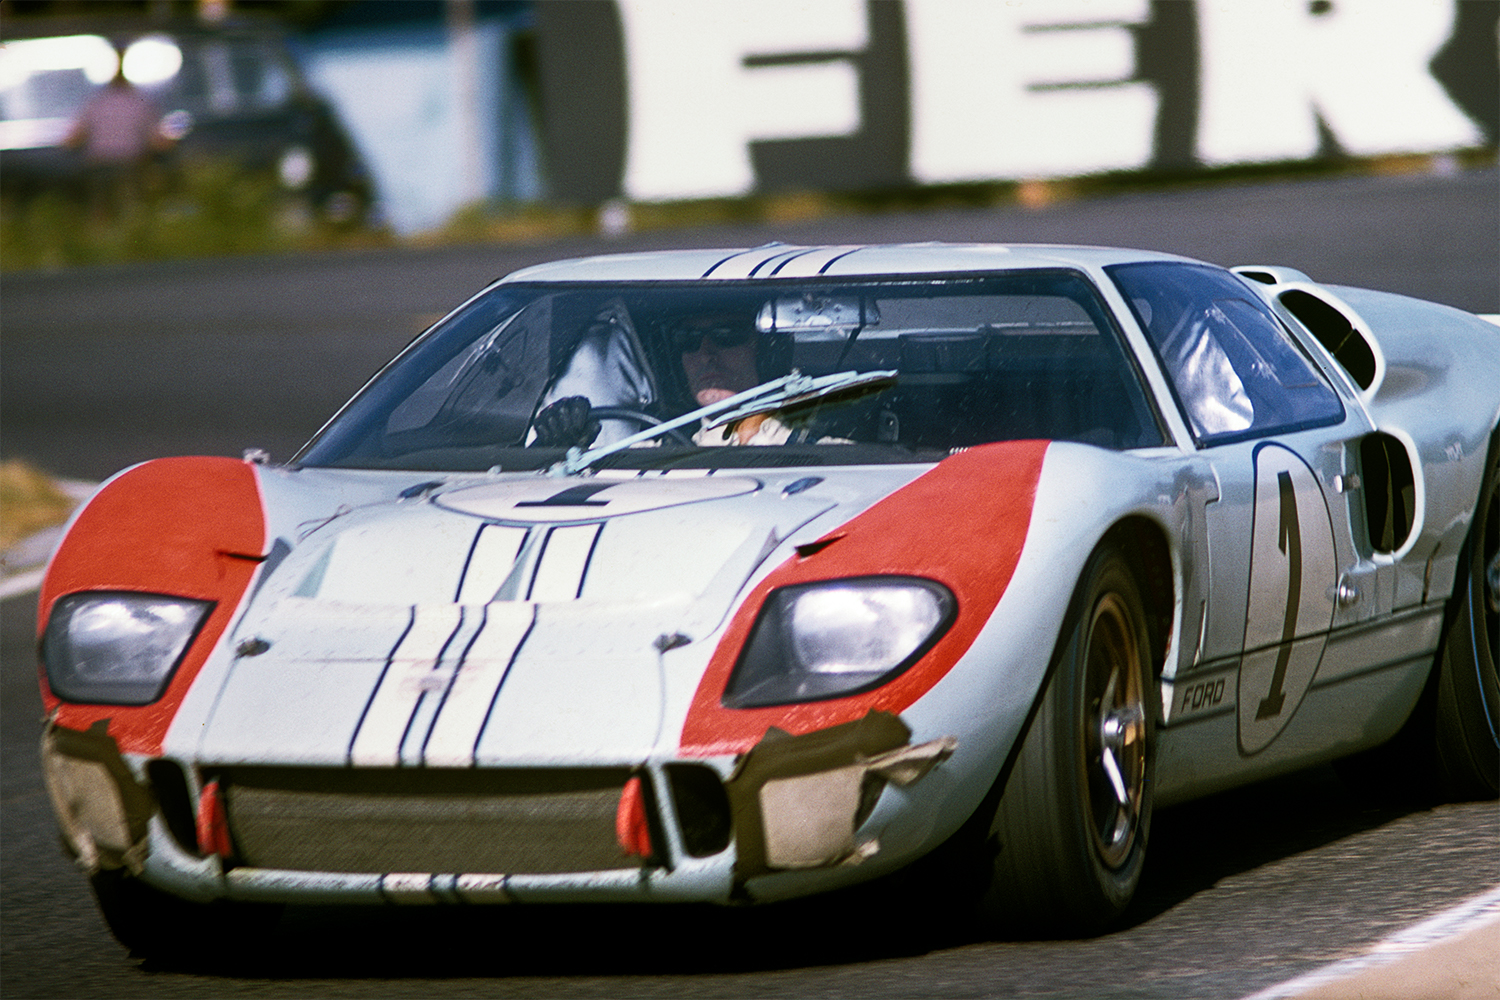 <strong>Ford GT40 Mark II</strong><br><strong>Car numbers: </strong>1, 2, 3, 4, 5, 6, 7 and 8<br>By the end of the 24-hour race, it became clear that one of the eight Ford GT40 Mark IIs was going to win. But to rub it in Ferrari’s face even more, Ford coordinated the three cars still running to cross the finish line simultaneously. But the rankings came in with Bruce McLaren and Chris Amon first (No. 2), Ken Miles [pictured here] and Denny Hulme second (No. 1) and Ronnie Bucknum and Dick Hutcherson third (No. 5).